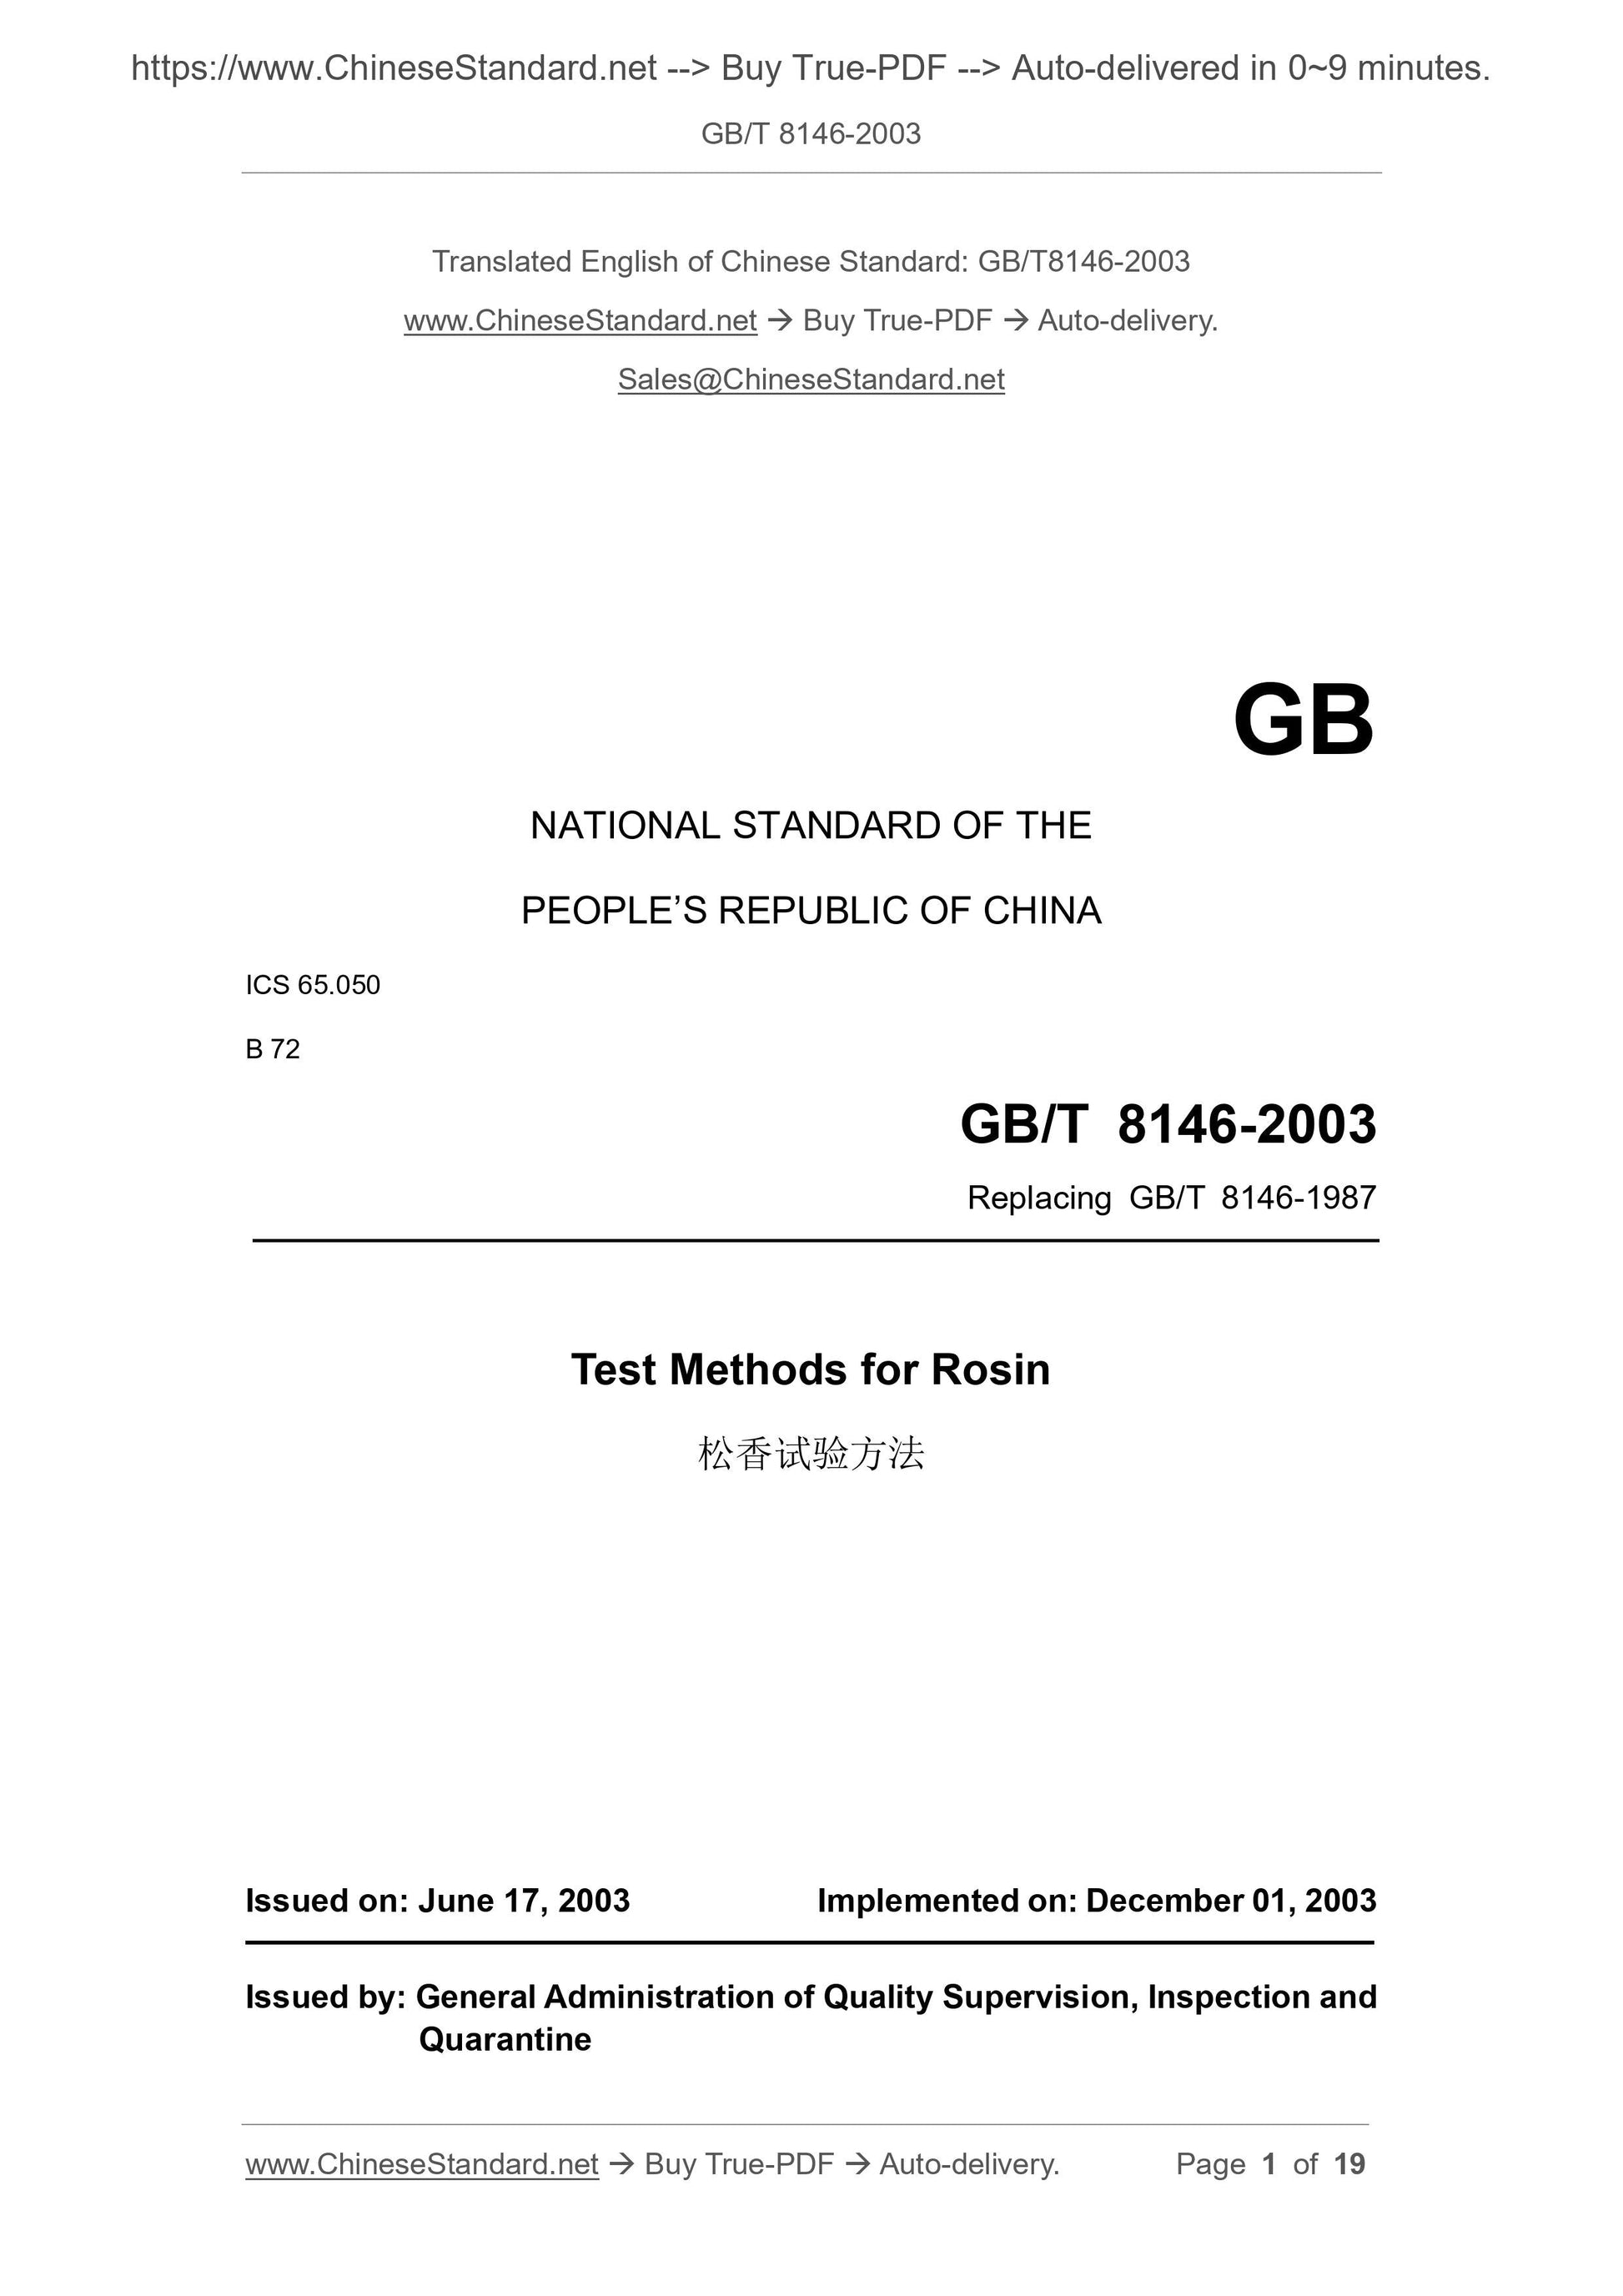 GB/T 8146-2003 Page 1